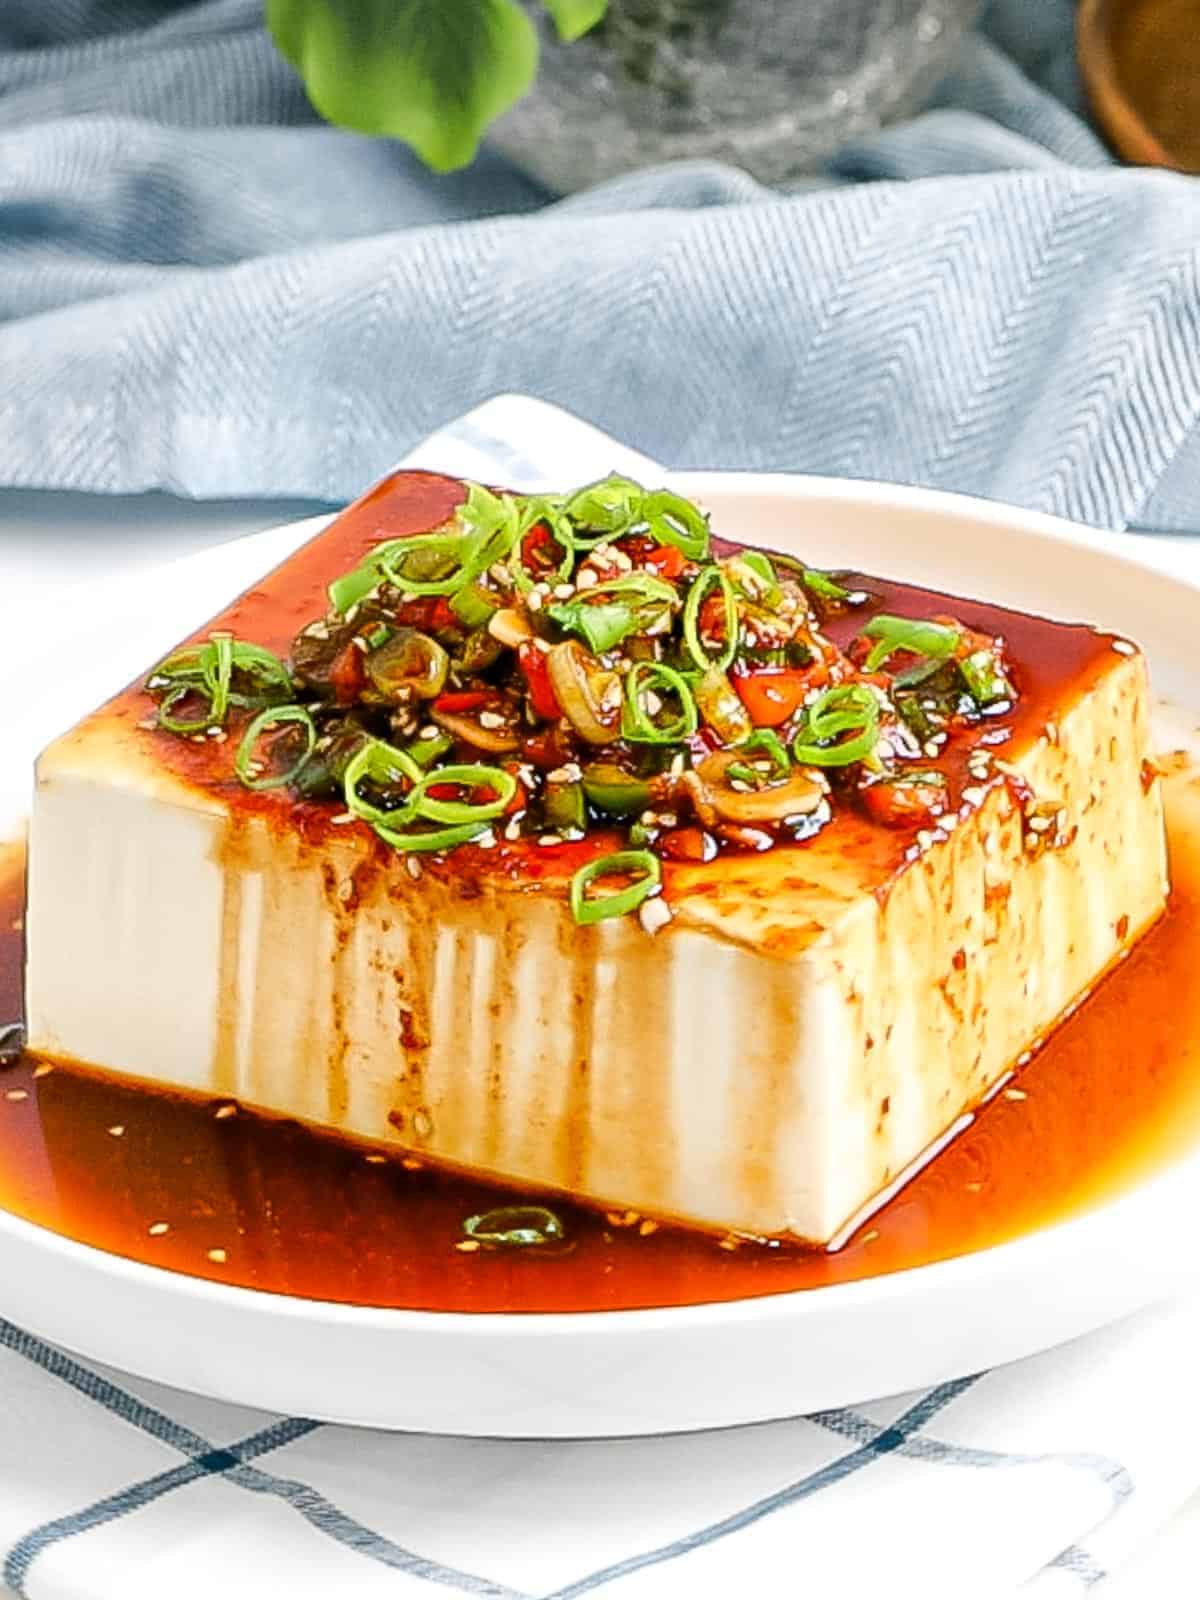 A close-up of a Korean tofu side dish glistening with a soy sauce dressing.